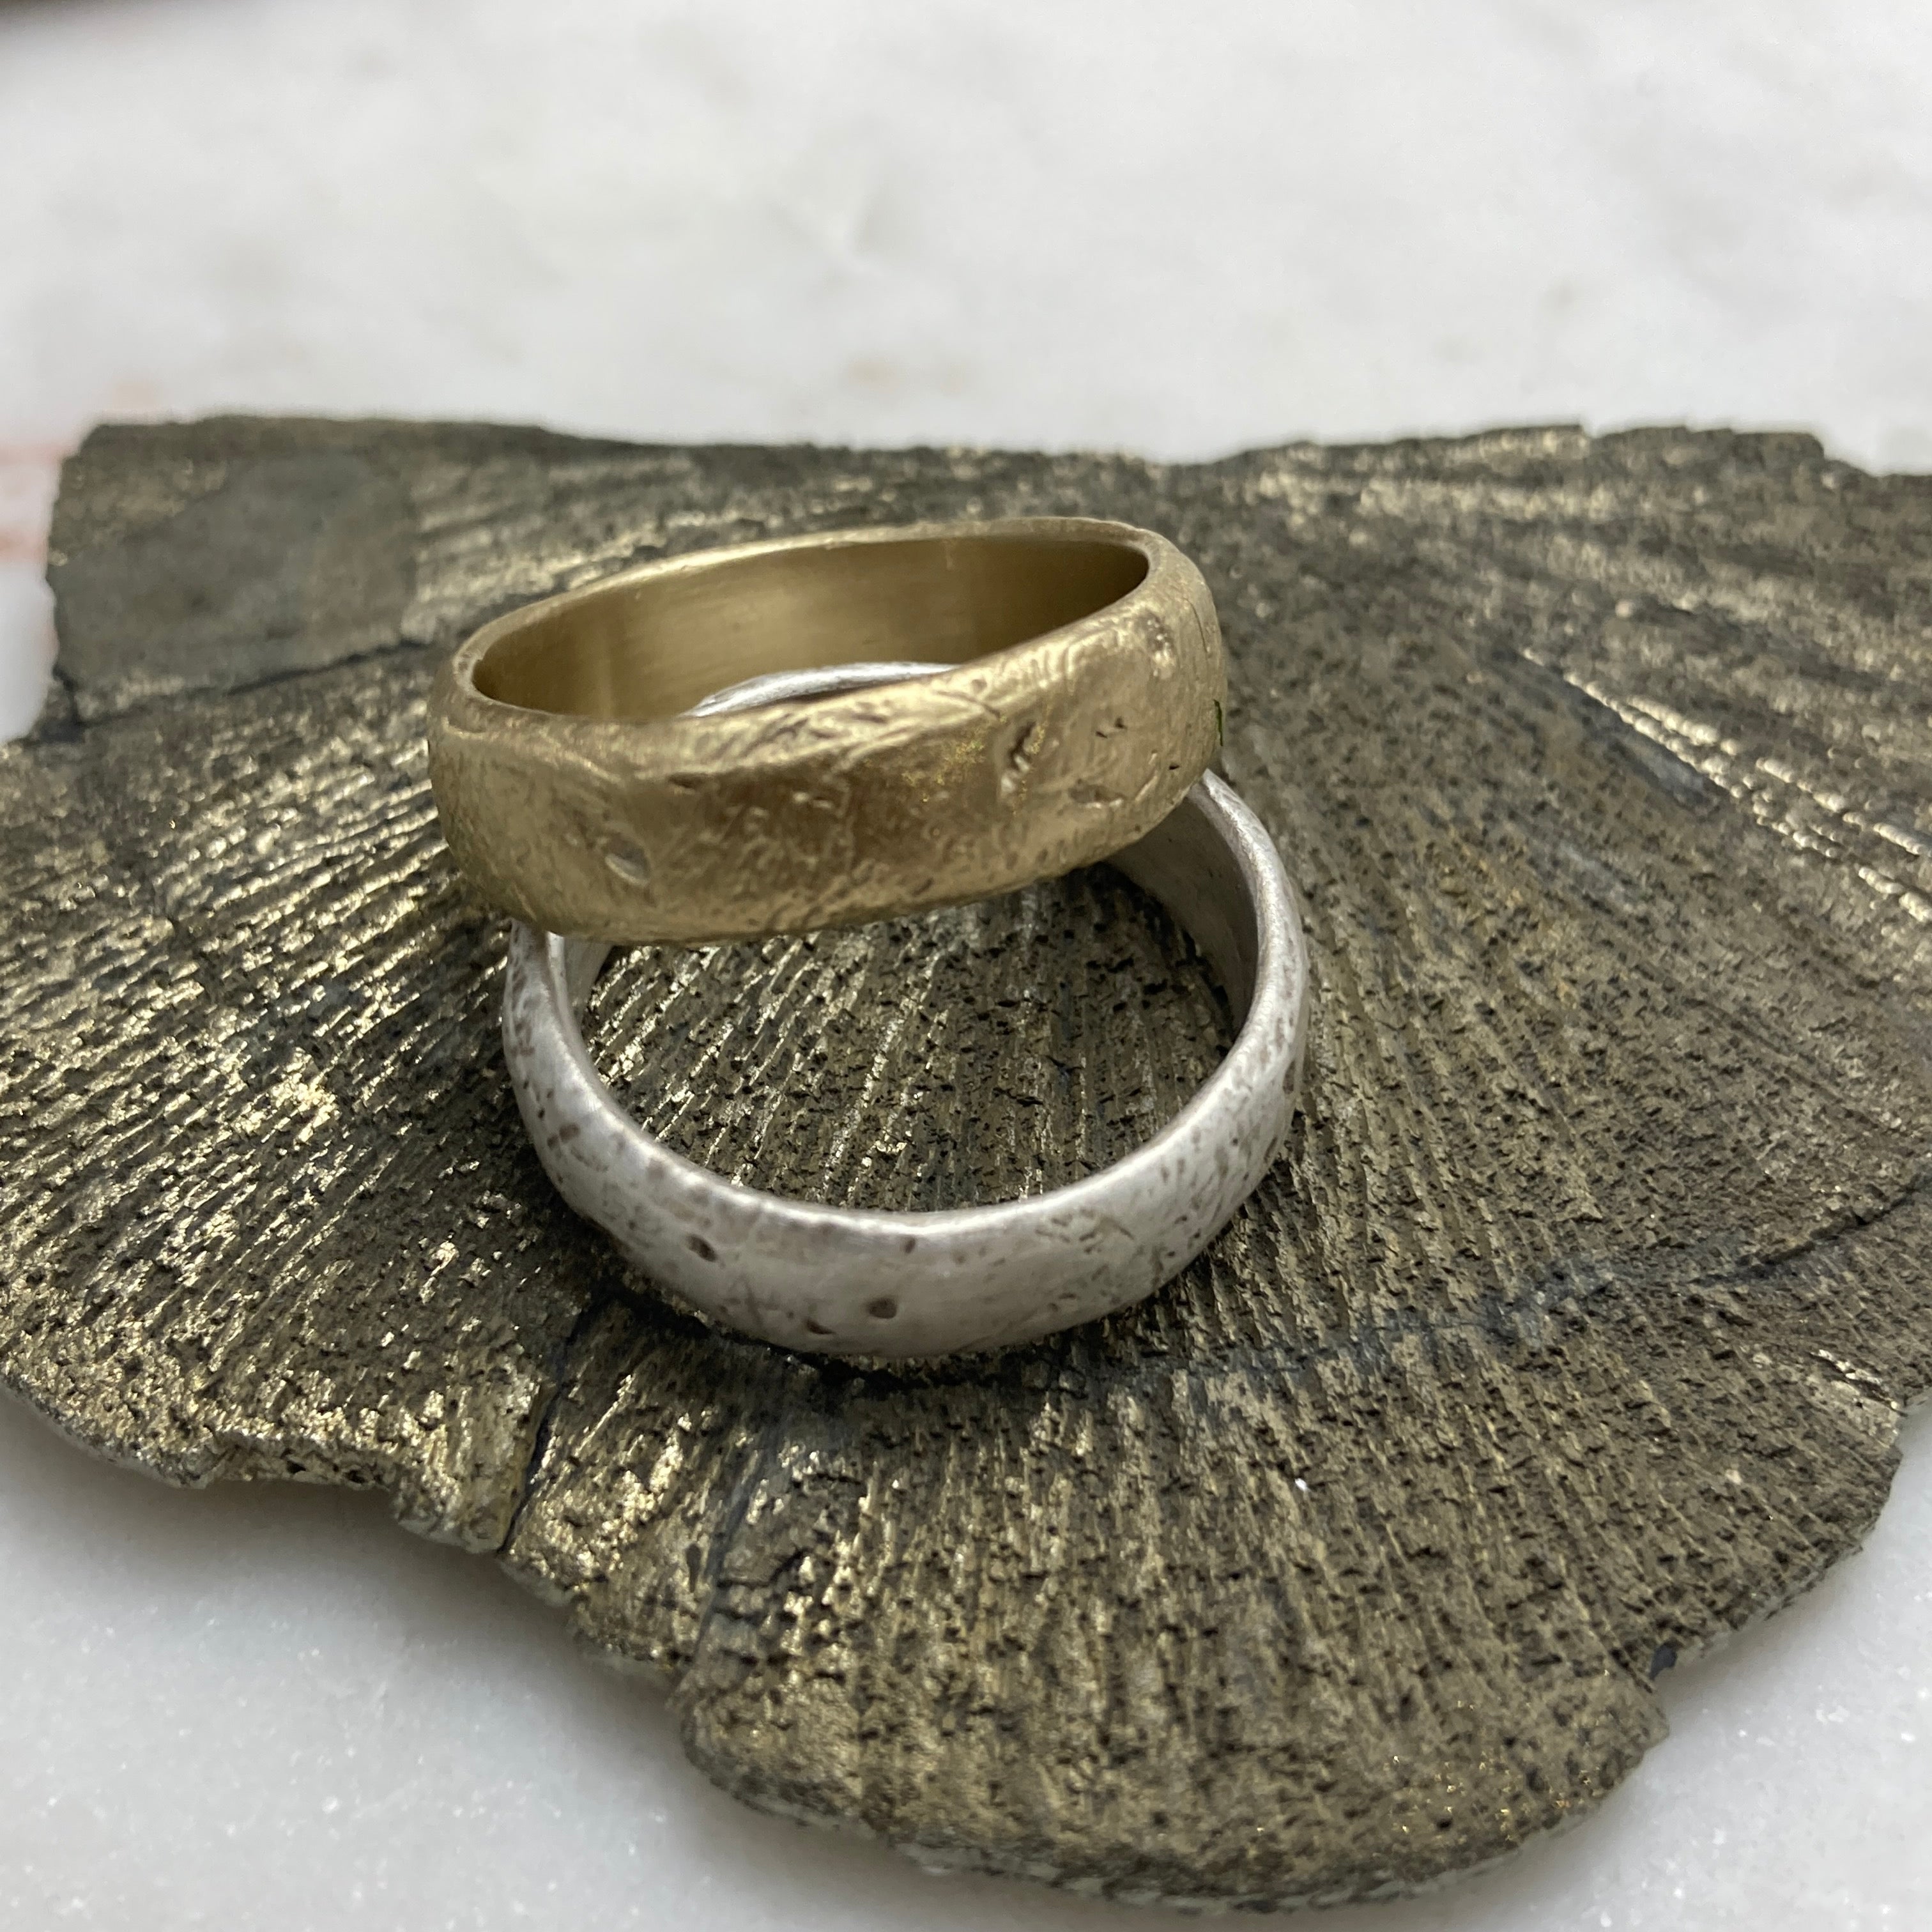 Worn Textured Ring in Gold or Silver